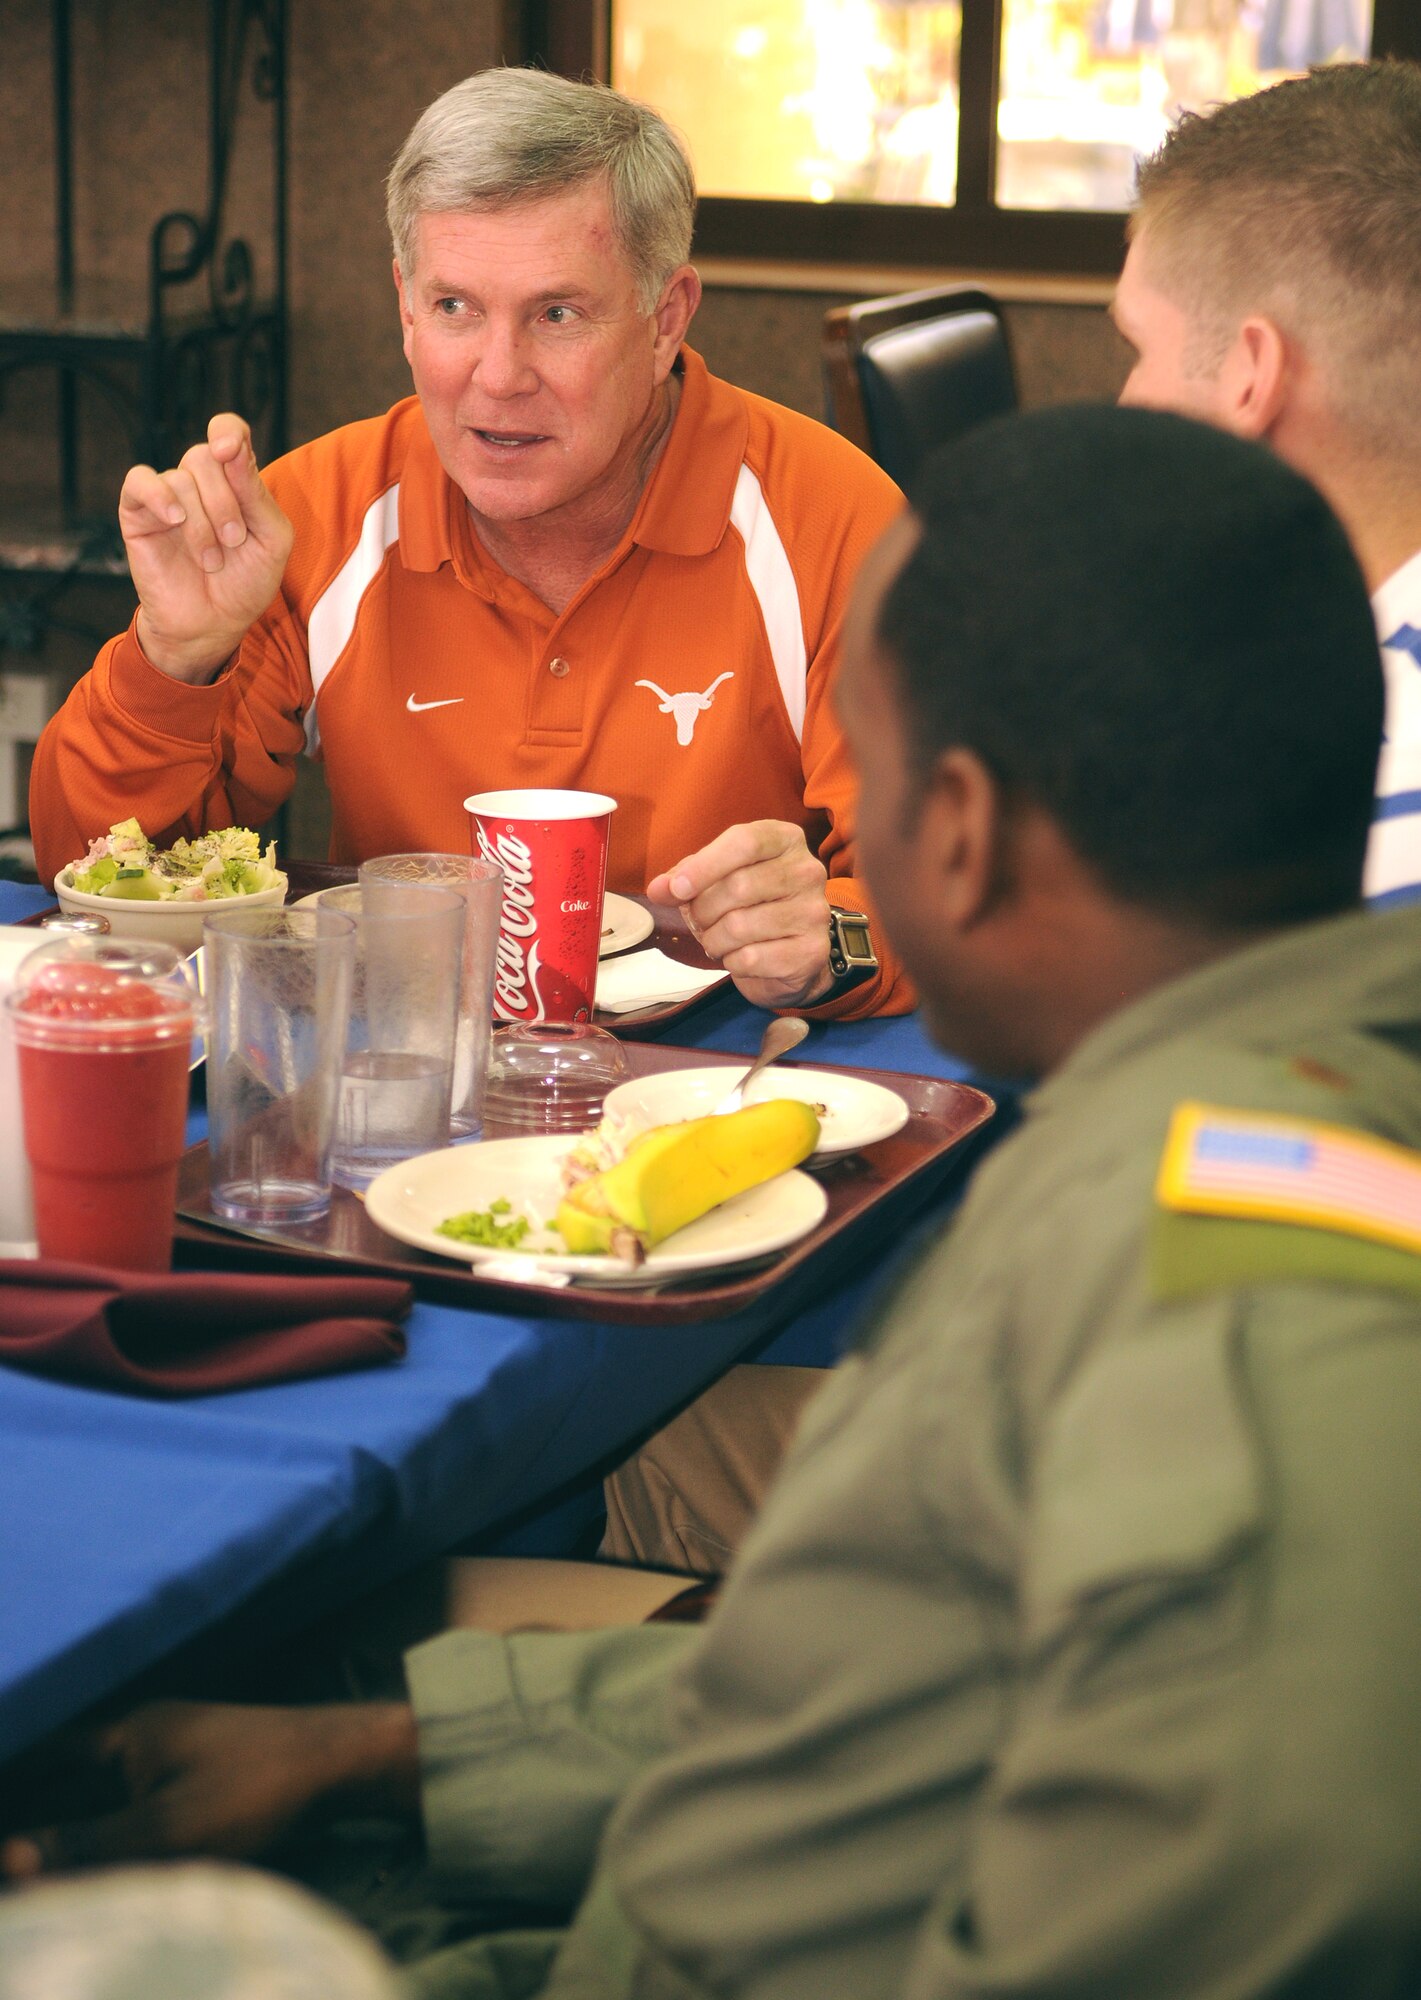 University of Texas head football coach Mack brown speaks and dines with Maj. John-Michael Calhoun, 817th Expeditionary Airlift Squadron, and other Longhorn fans during a luncheon Saturday, May 30, 2009 at the Sultan Inn here. The luncheon was part of the Armed Forces Entertainment Coaches Tour. Coach Brown was the NCAA’s 2008 coach of the year. (U.S. Air Force photo/Airman 1st Class Alex Martinez)